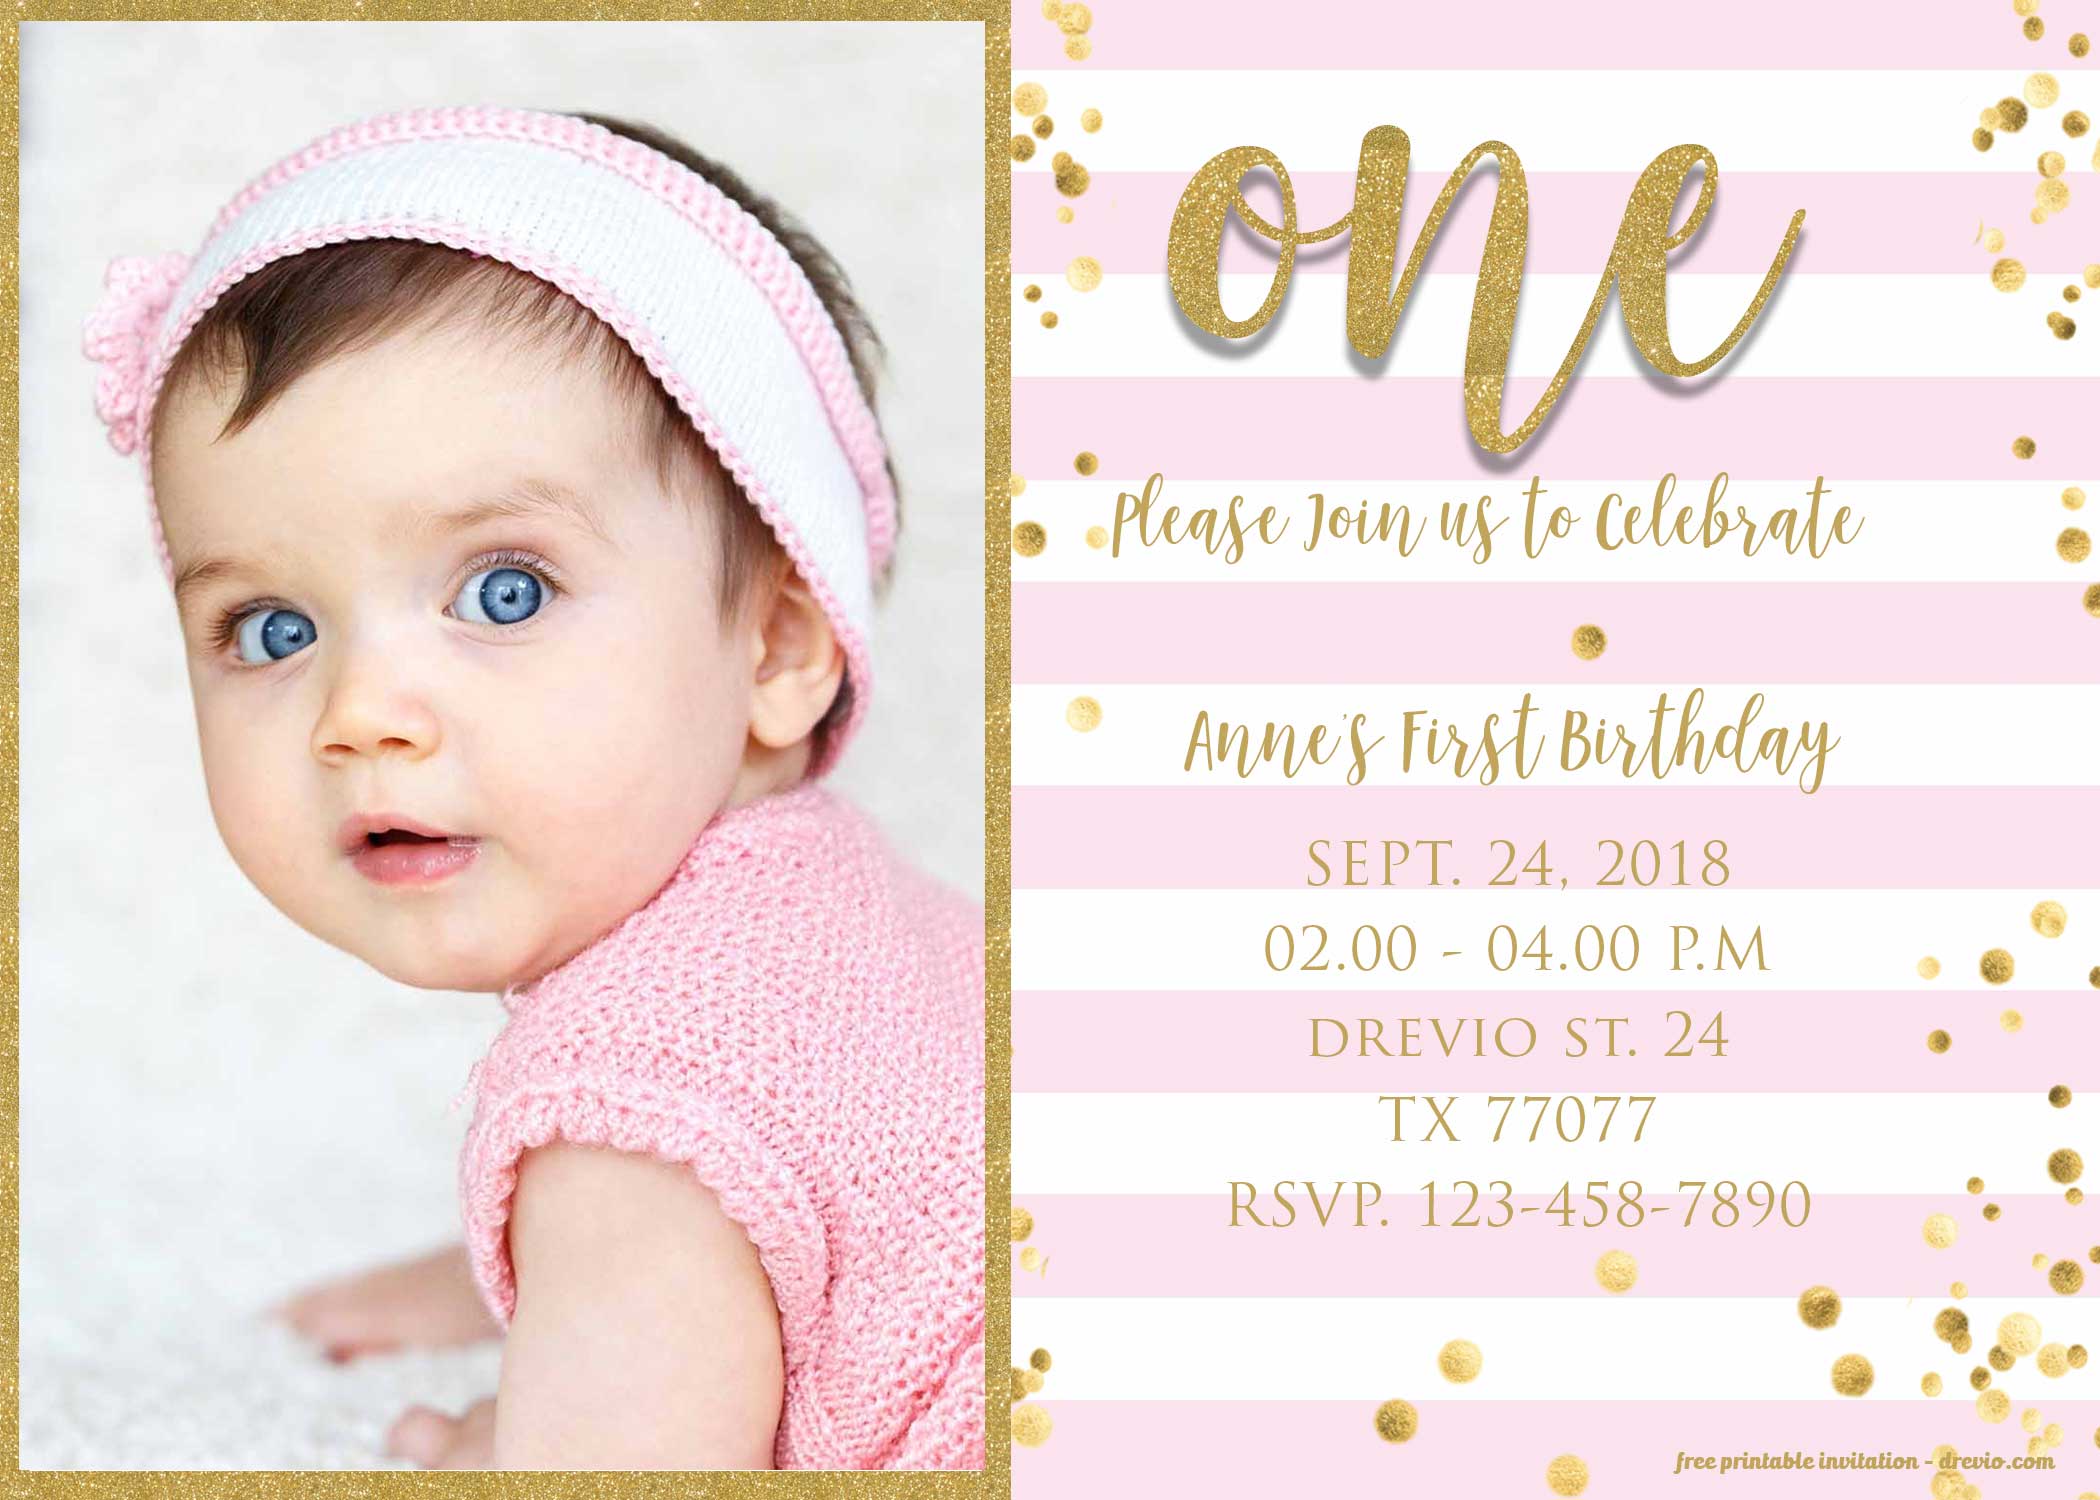 Free First Birthday Invitation Cards Templates - Printable Templates Free